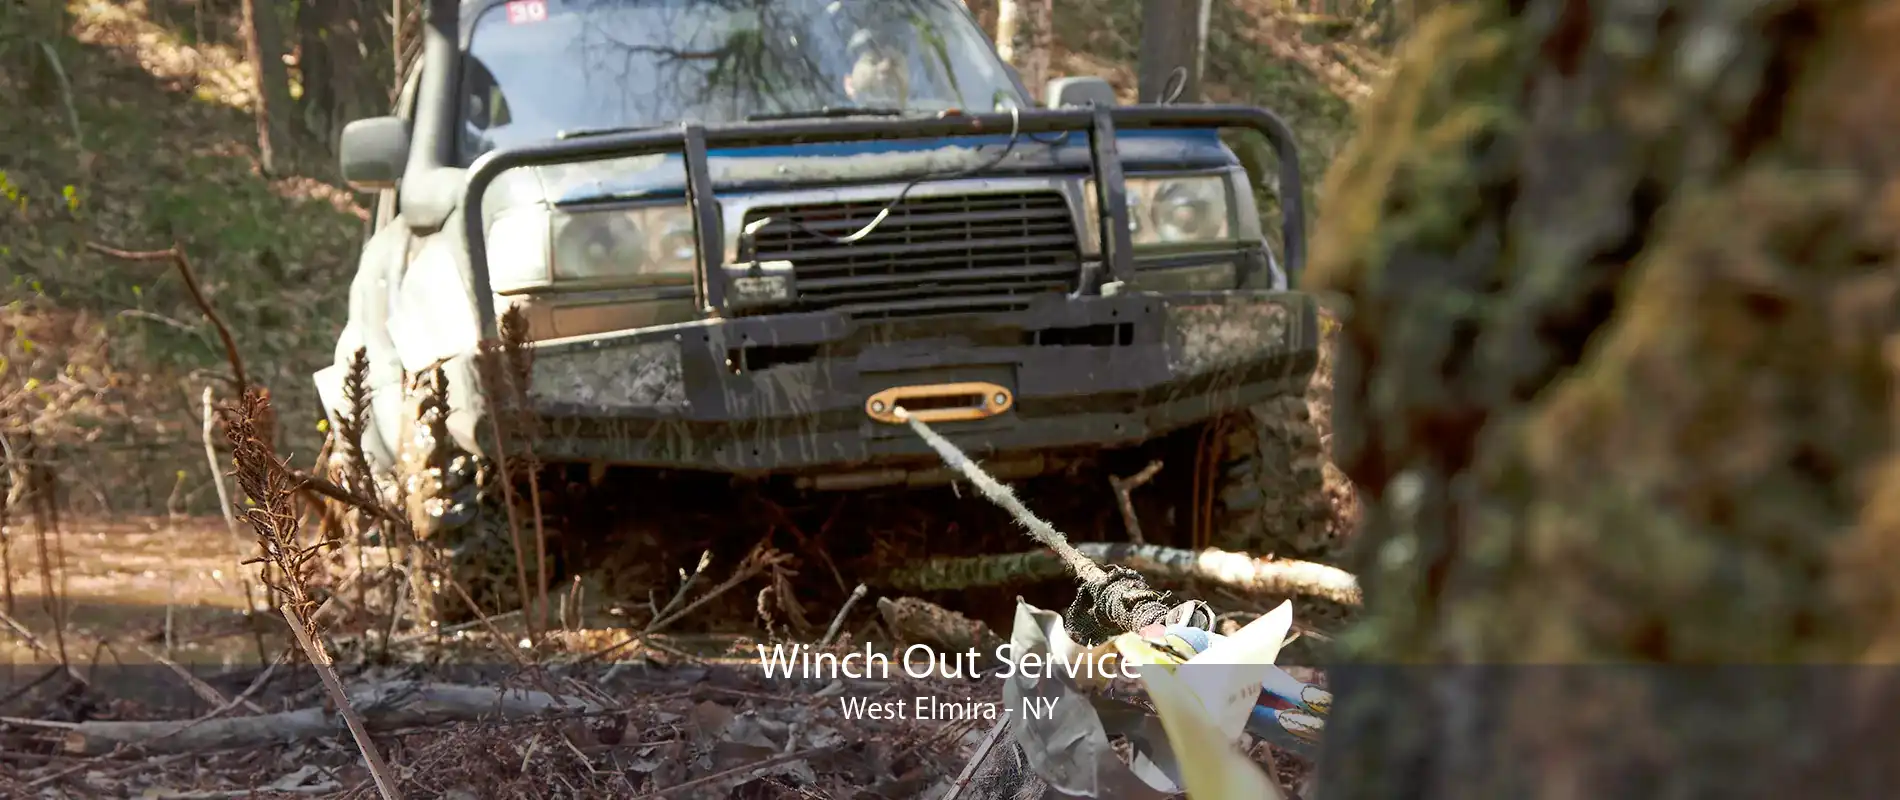 Winch Out Service West Elmira - NY